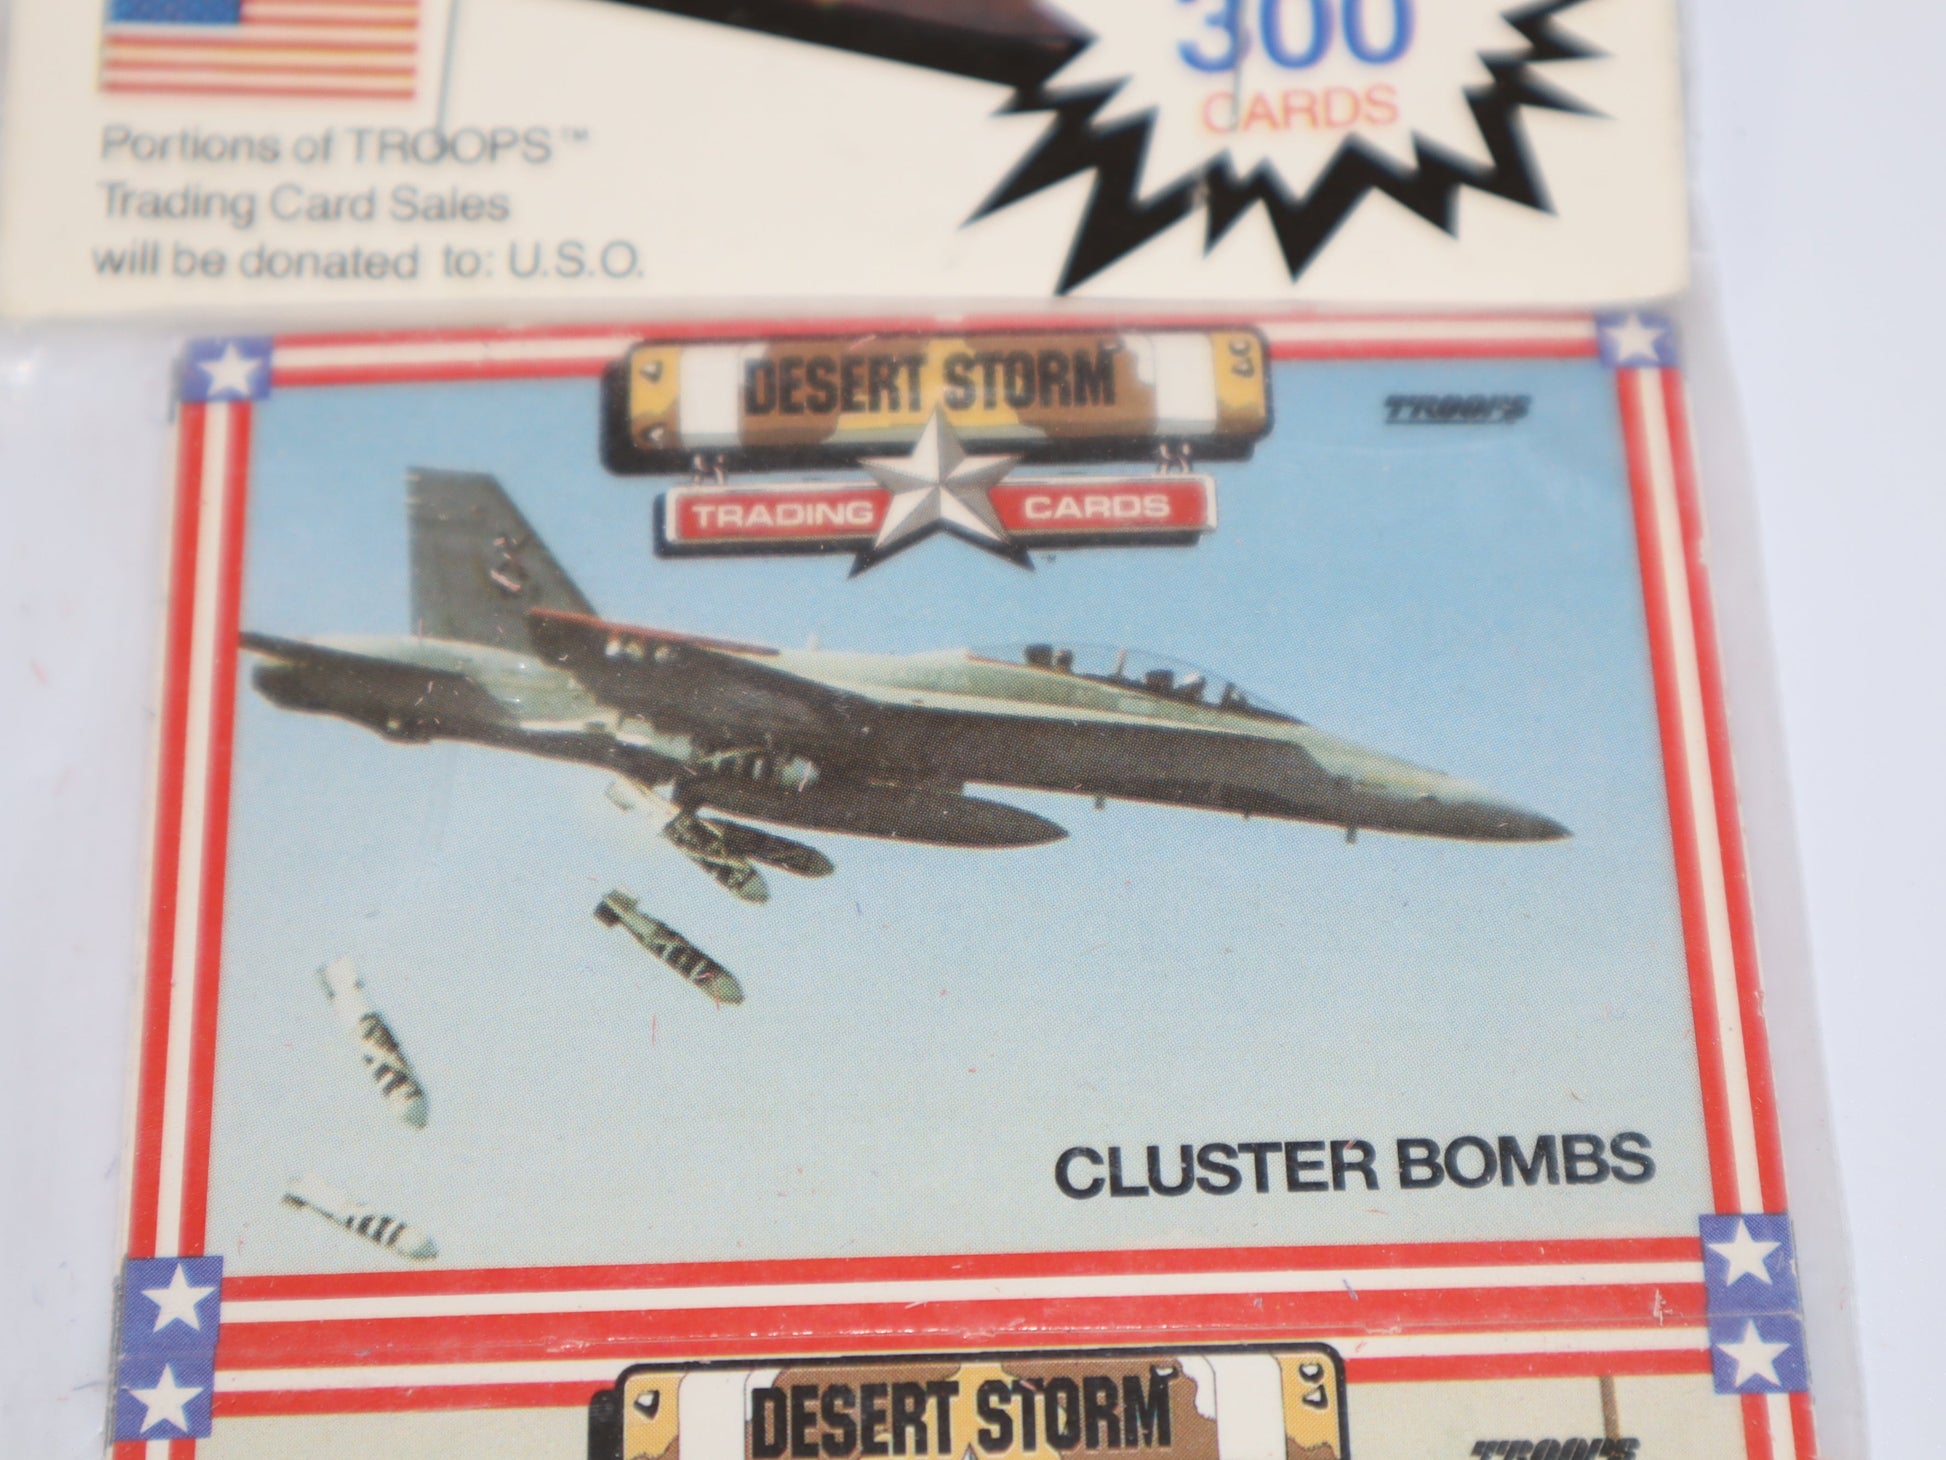 1991 TROOPS Desert Storm: Weapons Series 1 Trading Cards Hanger Pack - Collectibles